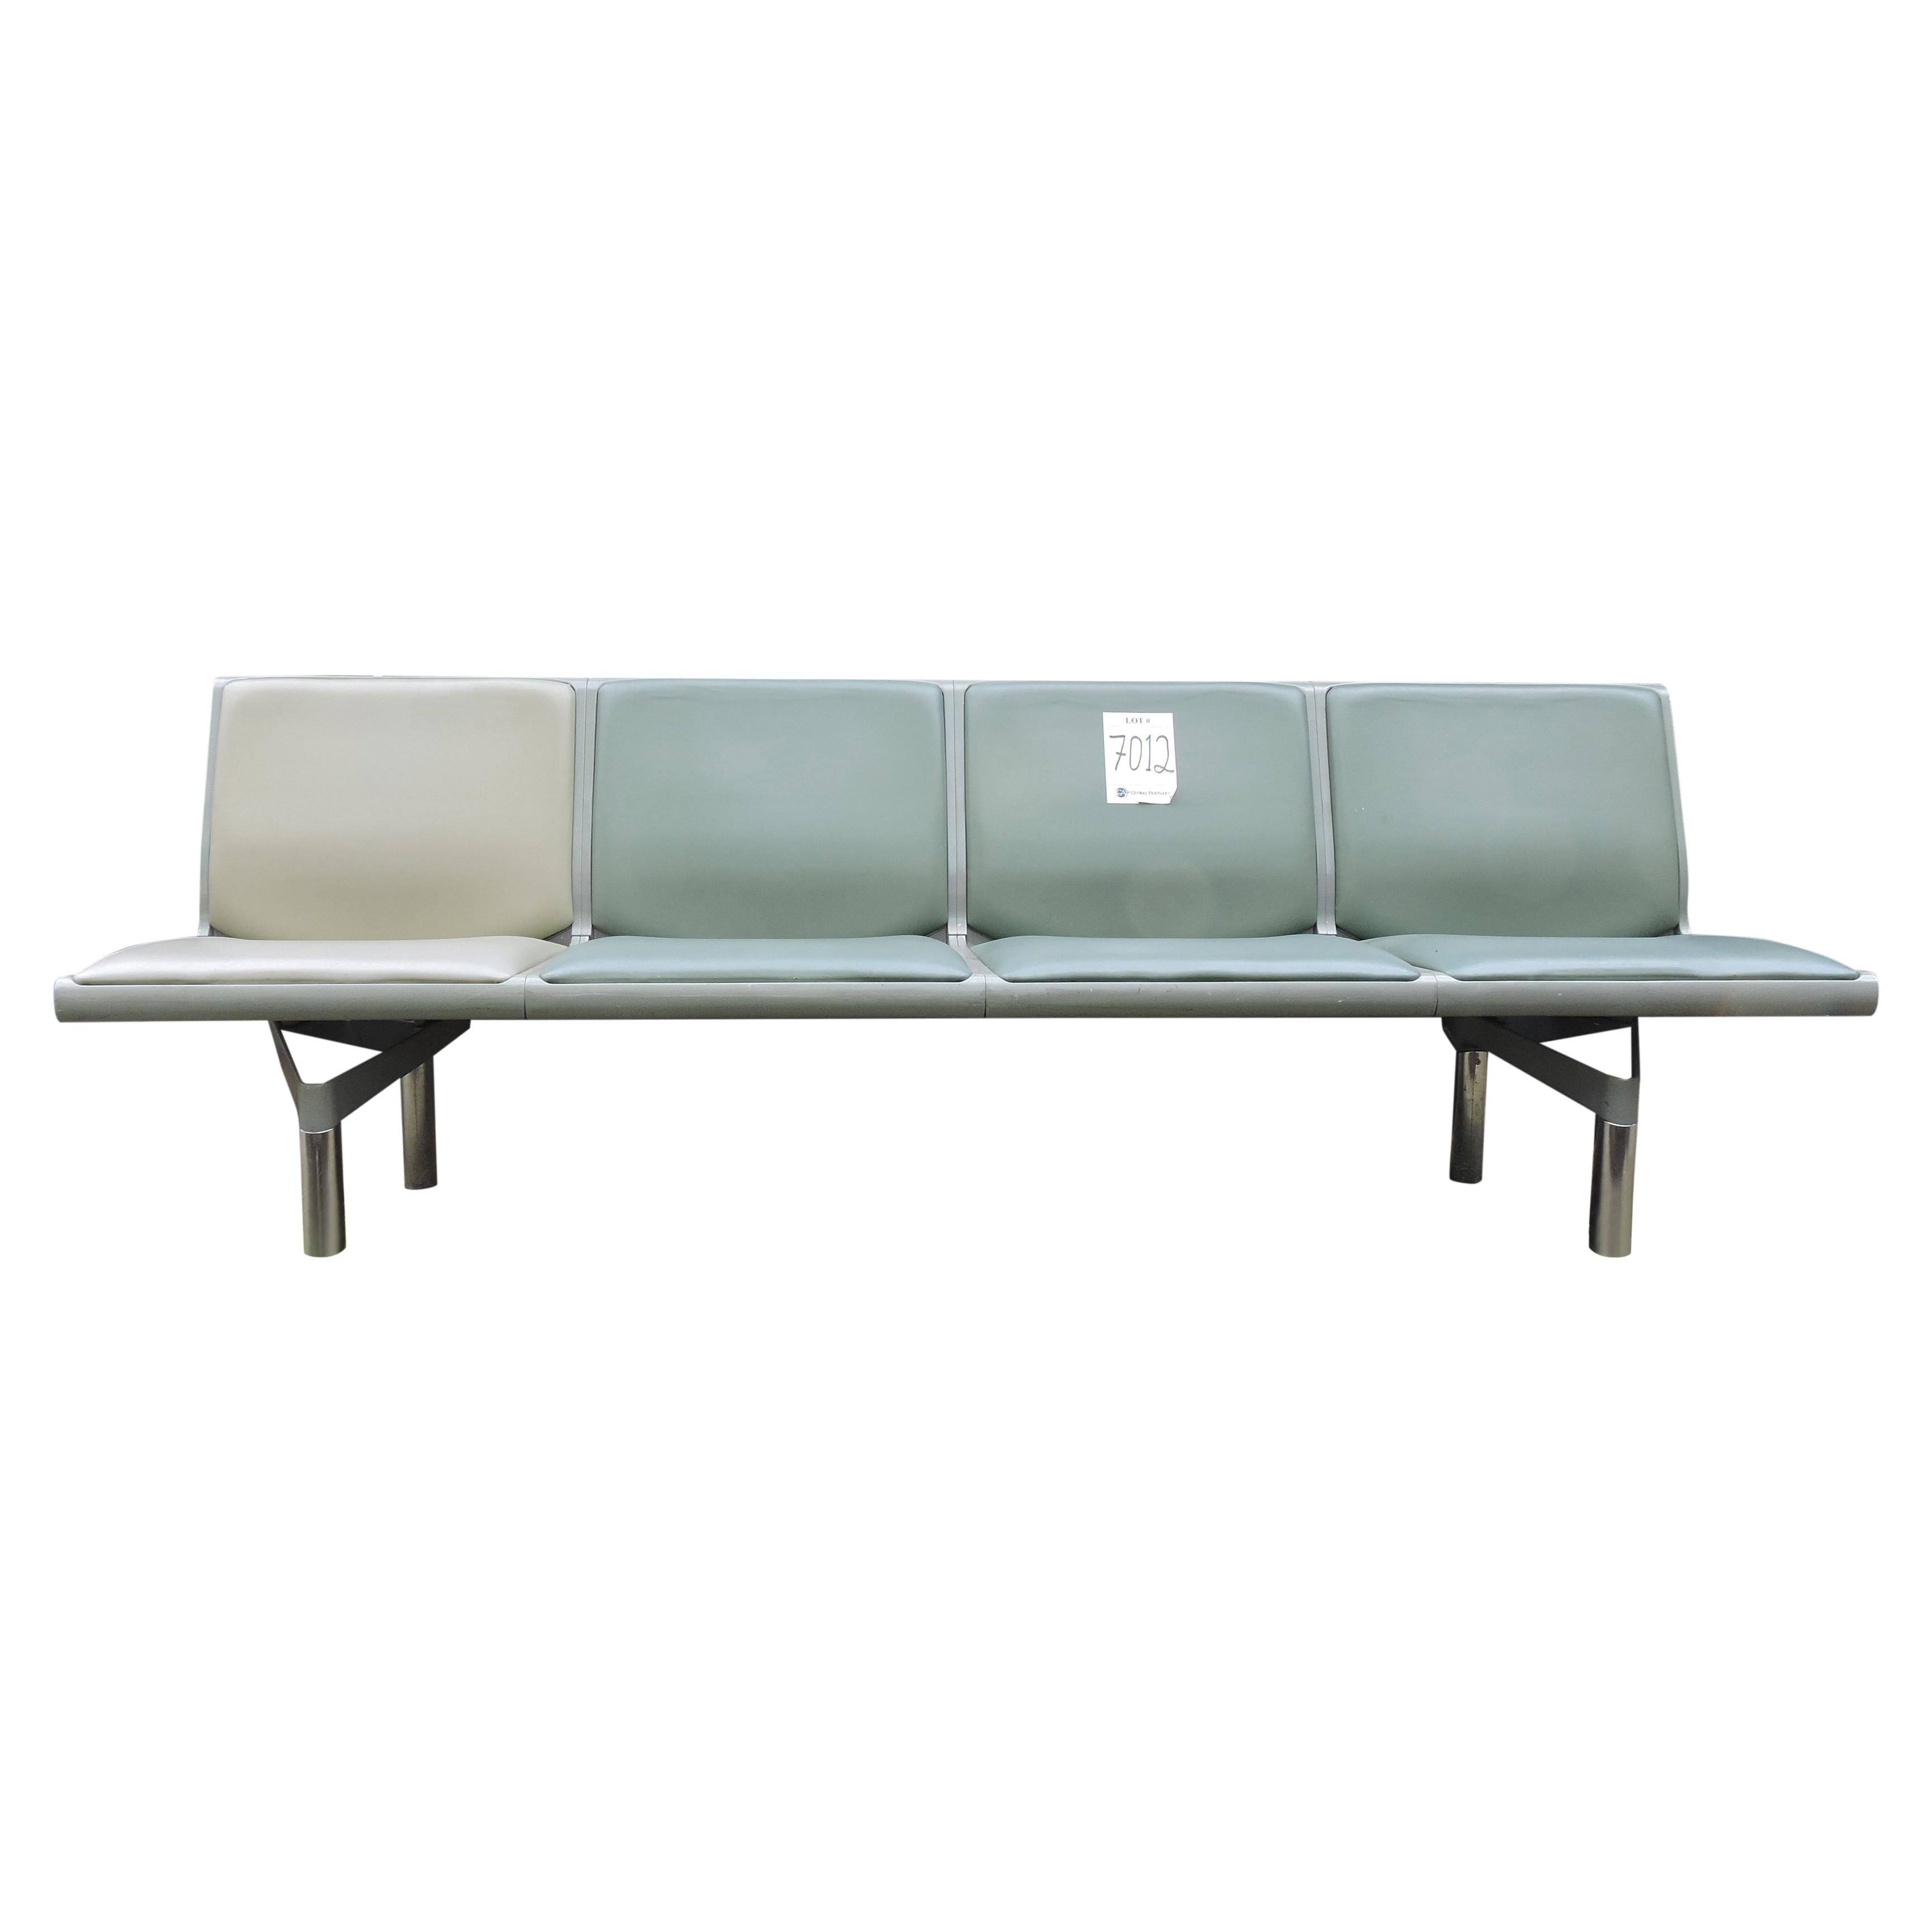 This four-person bench is from the now closed terminal 1 at Heathrow airport. It is made from cast alloy and green leather.